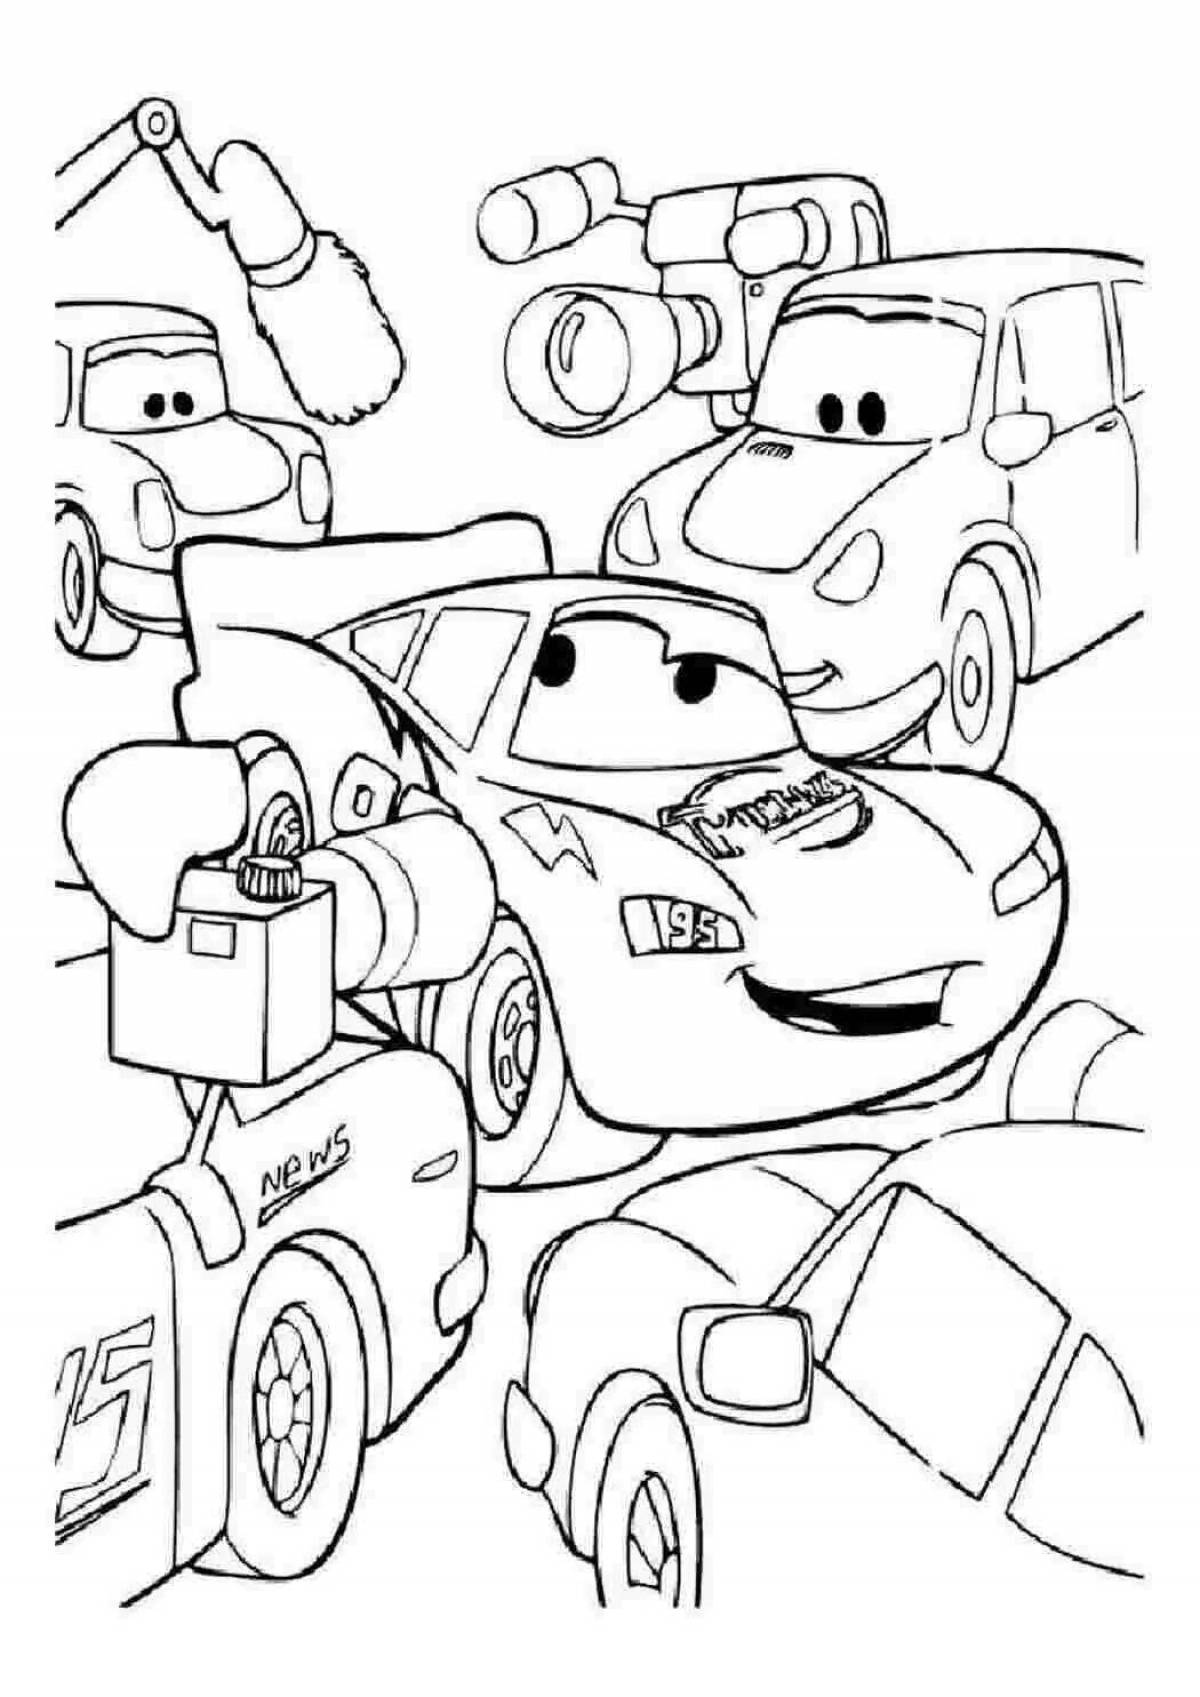 Macqueen's amusing car coloring pages